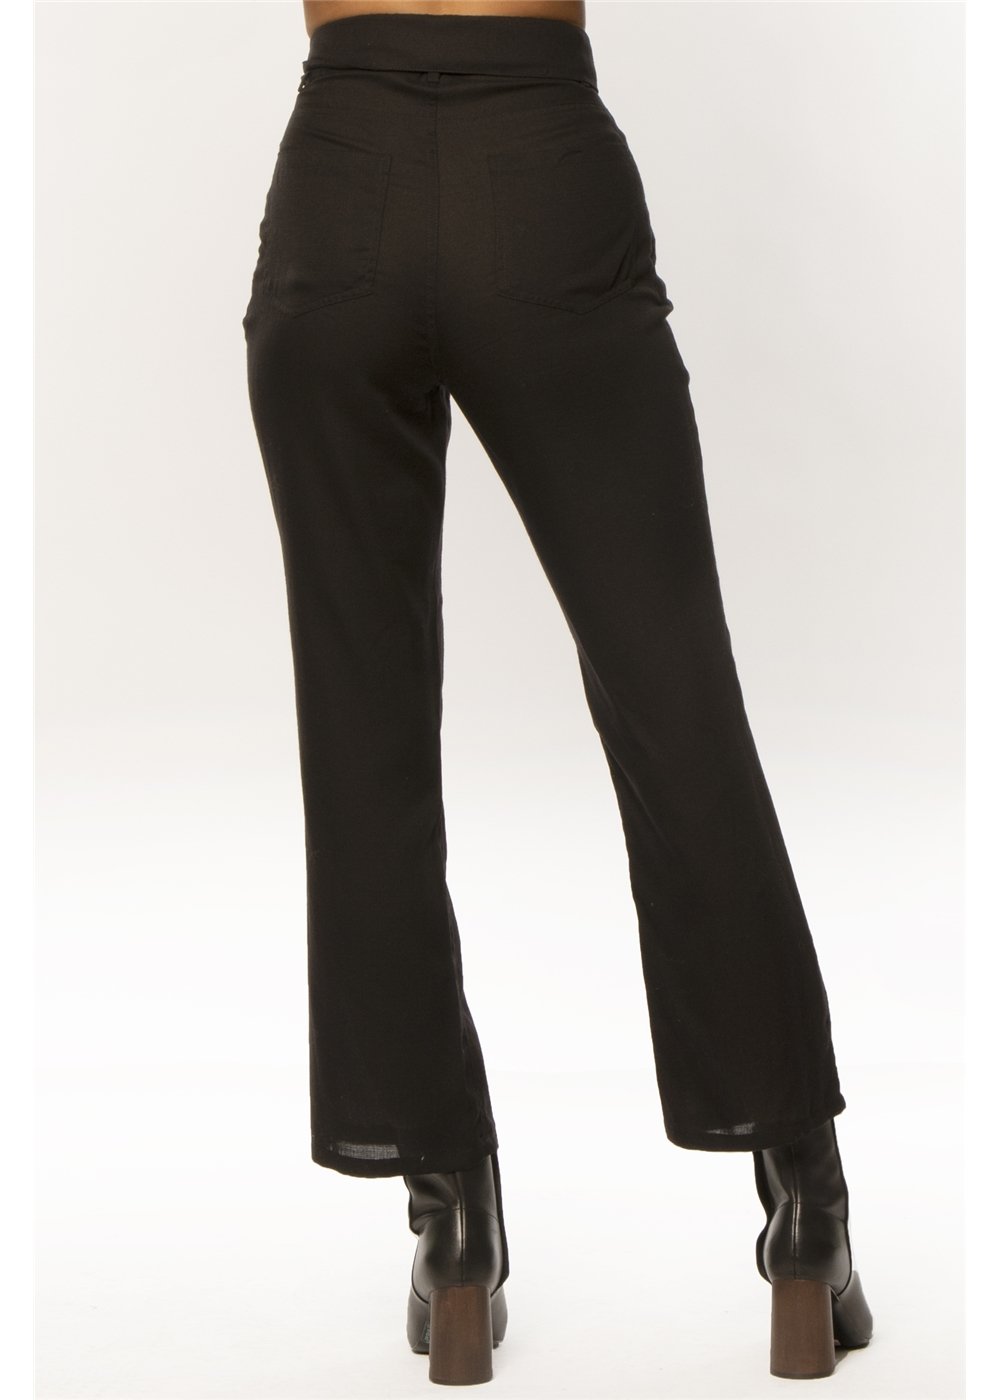 Amuse Society Women's Dolly Woven Pant in Black. Back View on Model.